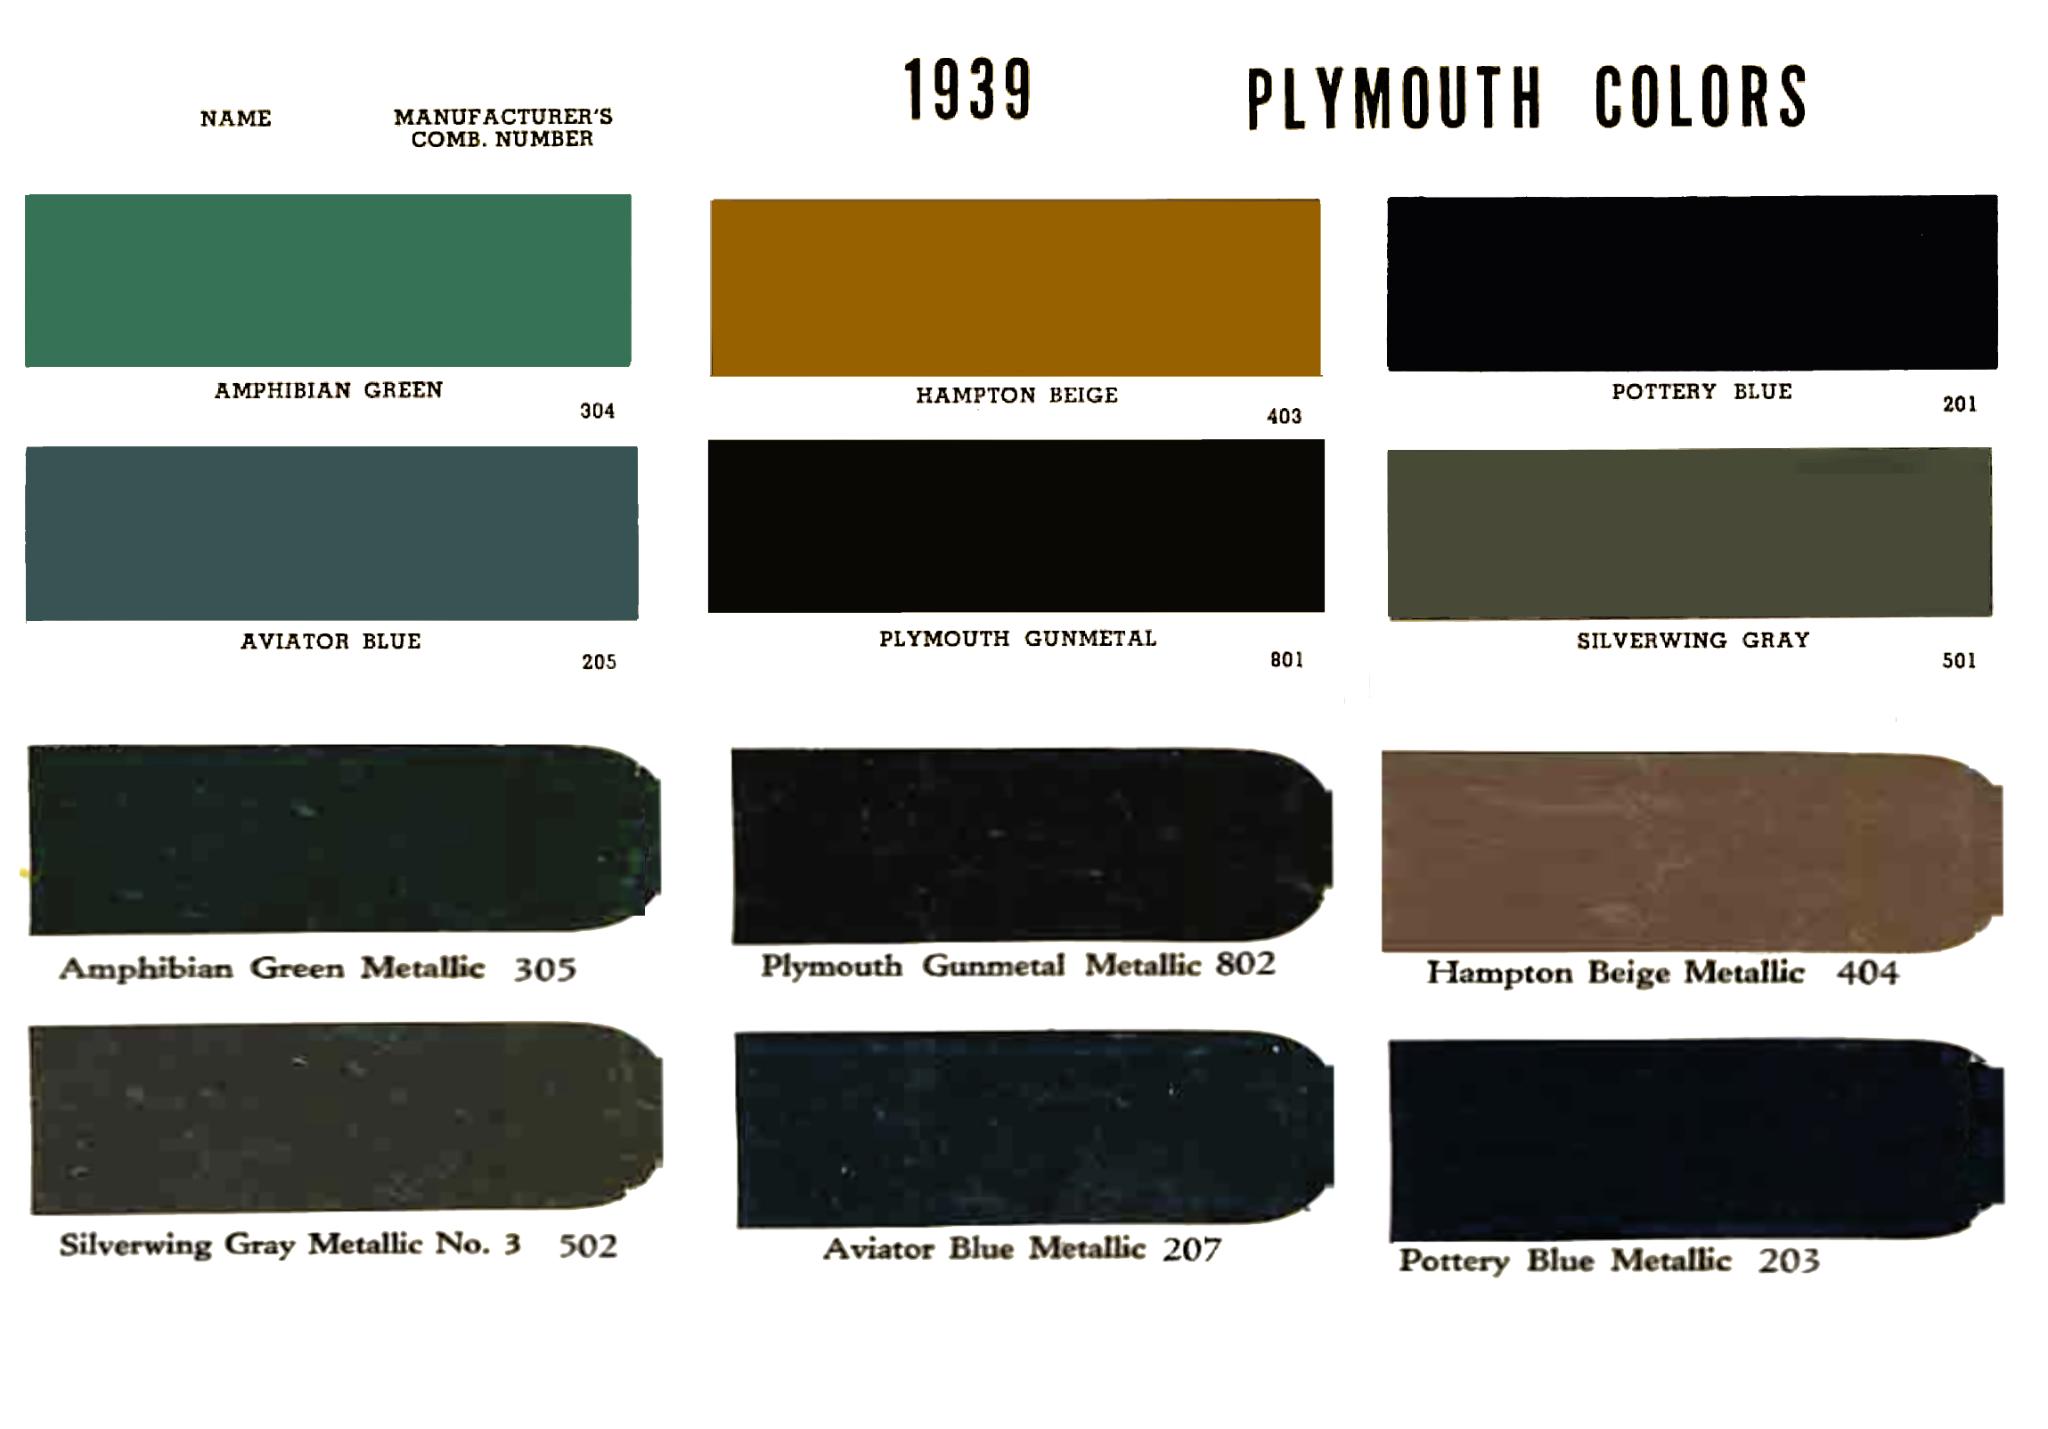 Plymouth paint code chart for 1939 vehicles